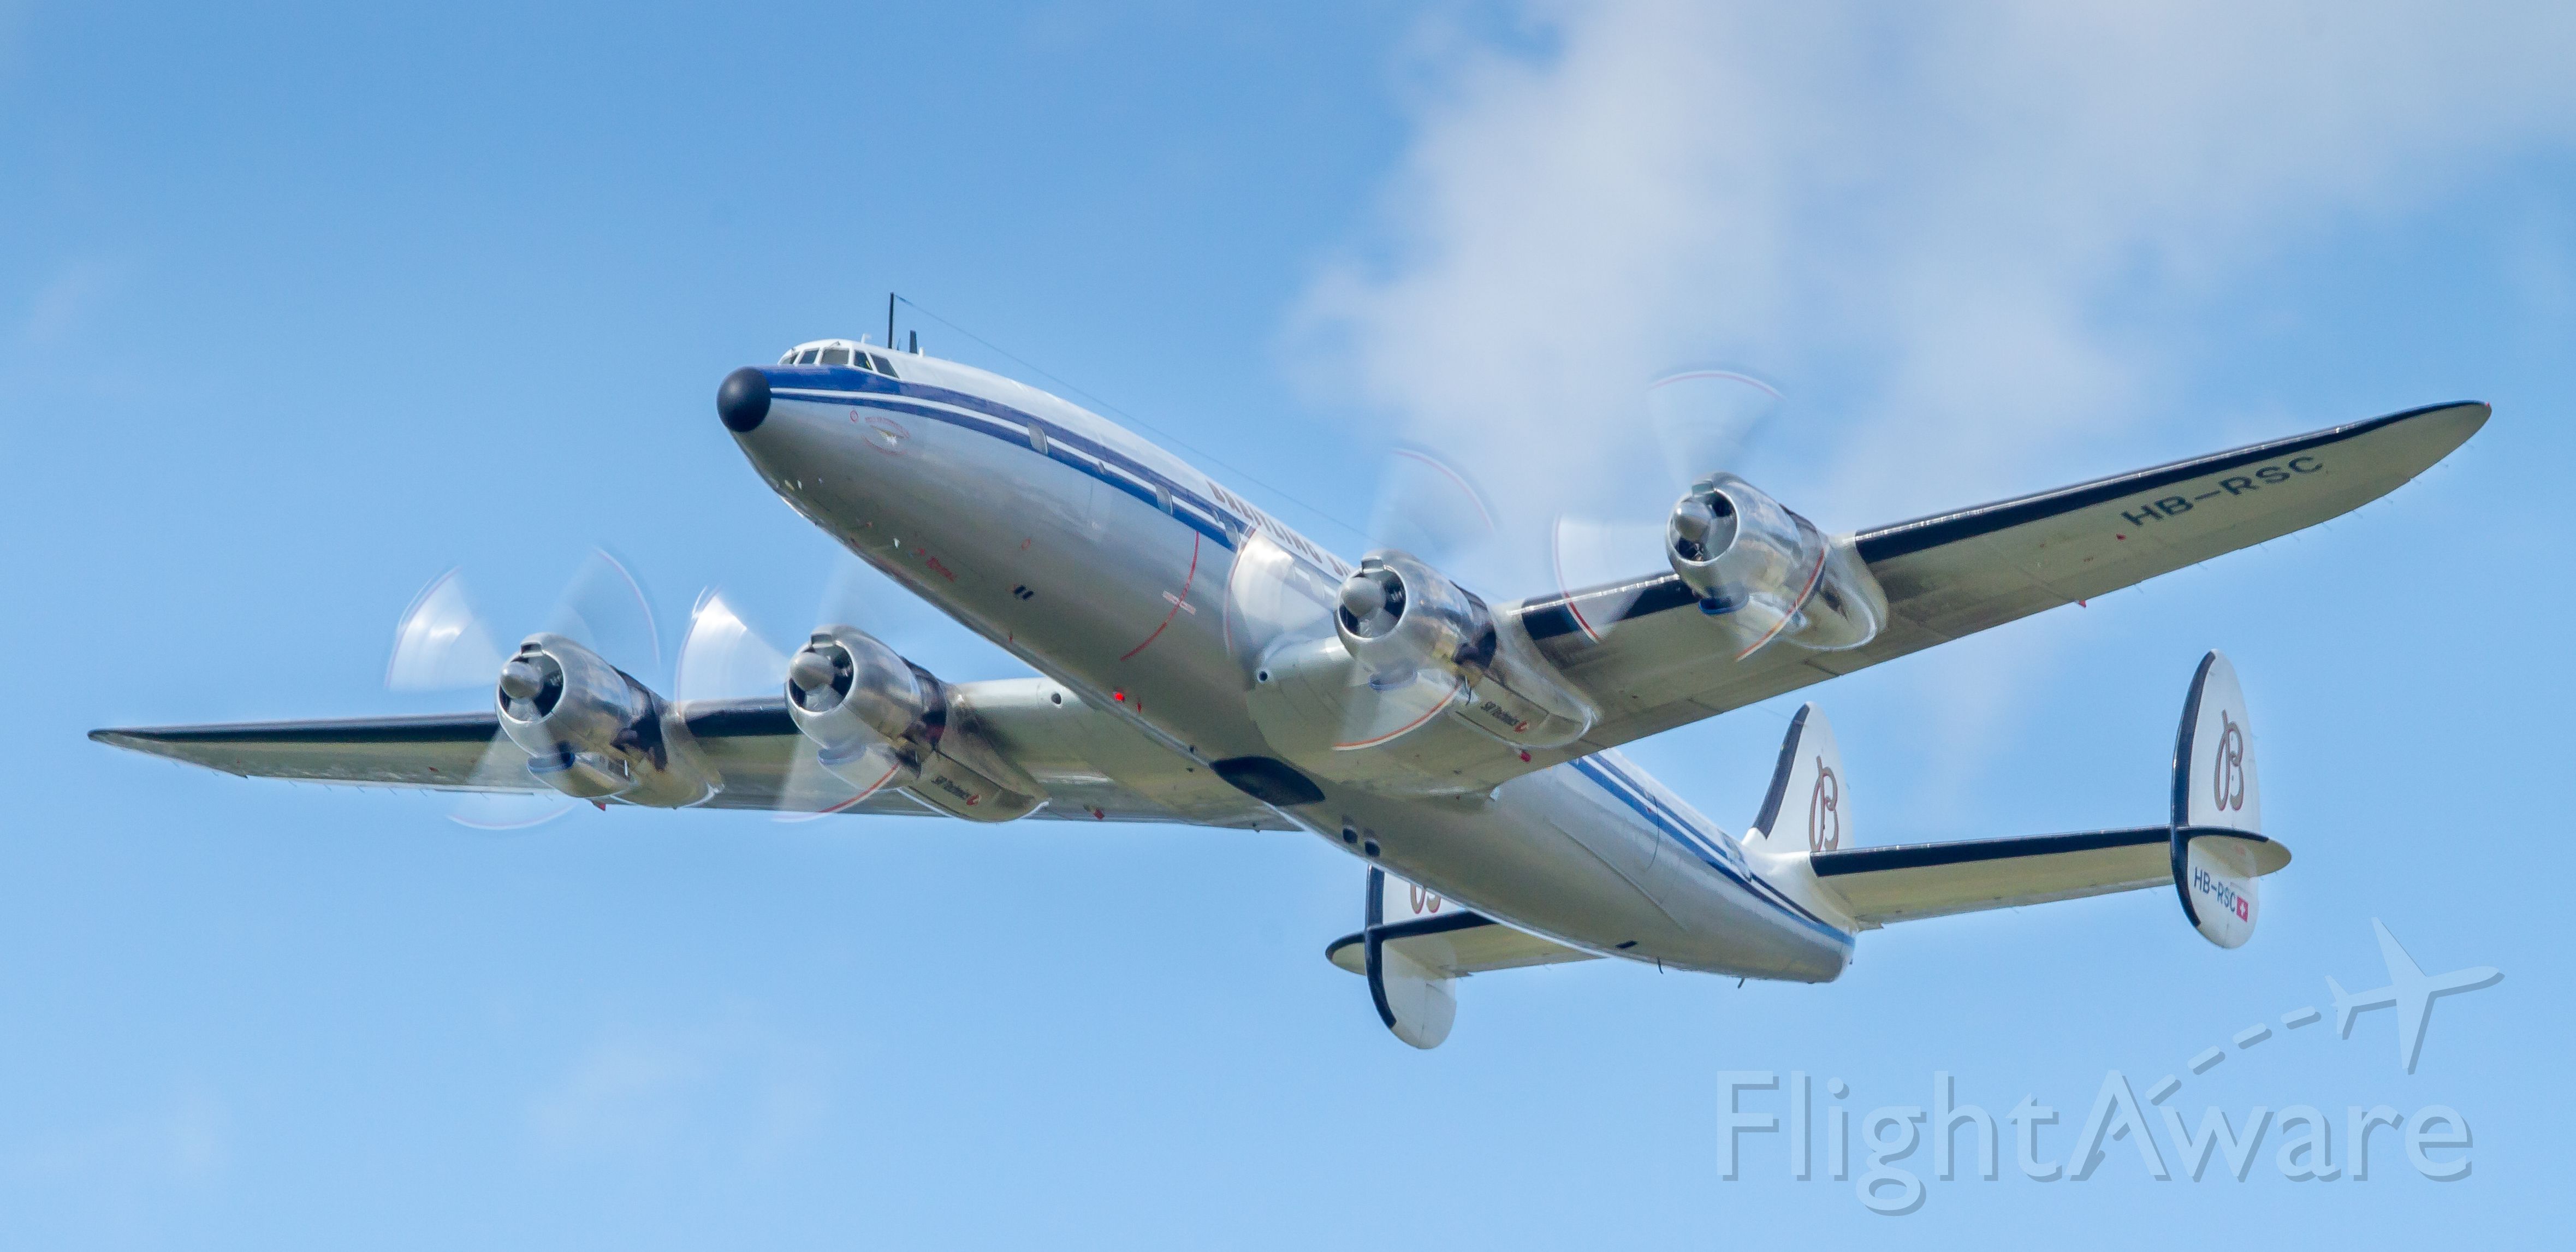 HB-RSC — - The Breitling Super Constellation does a flyby at Farnborough 2014